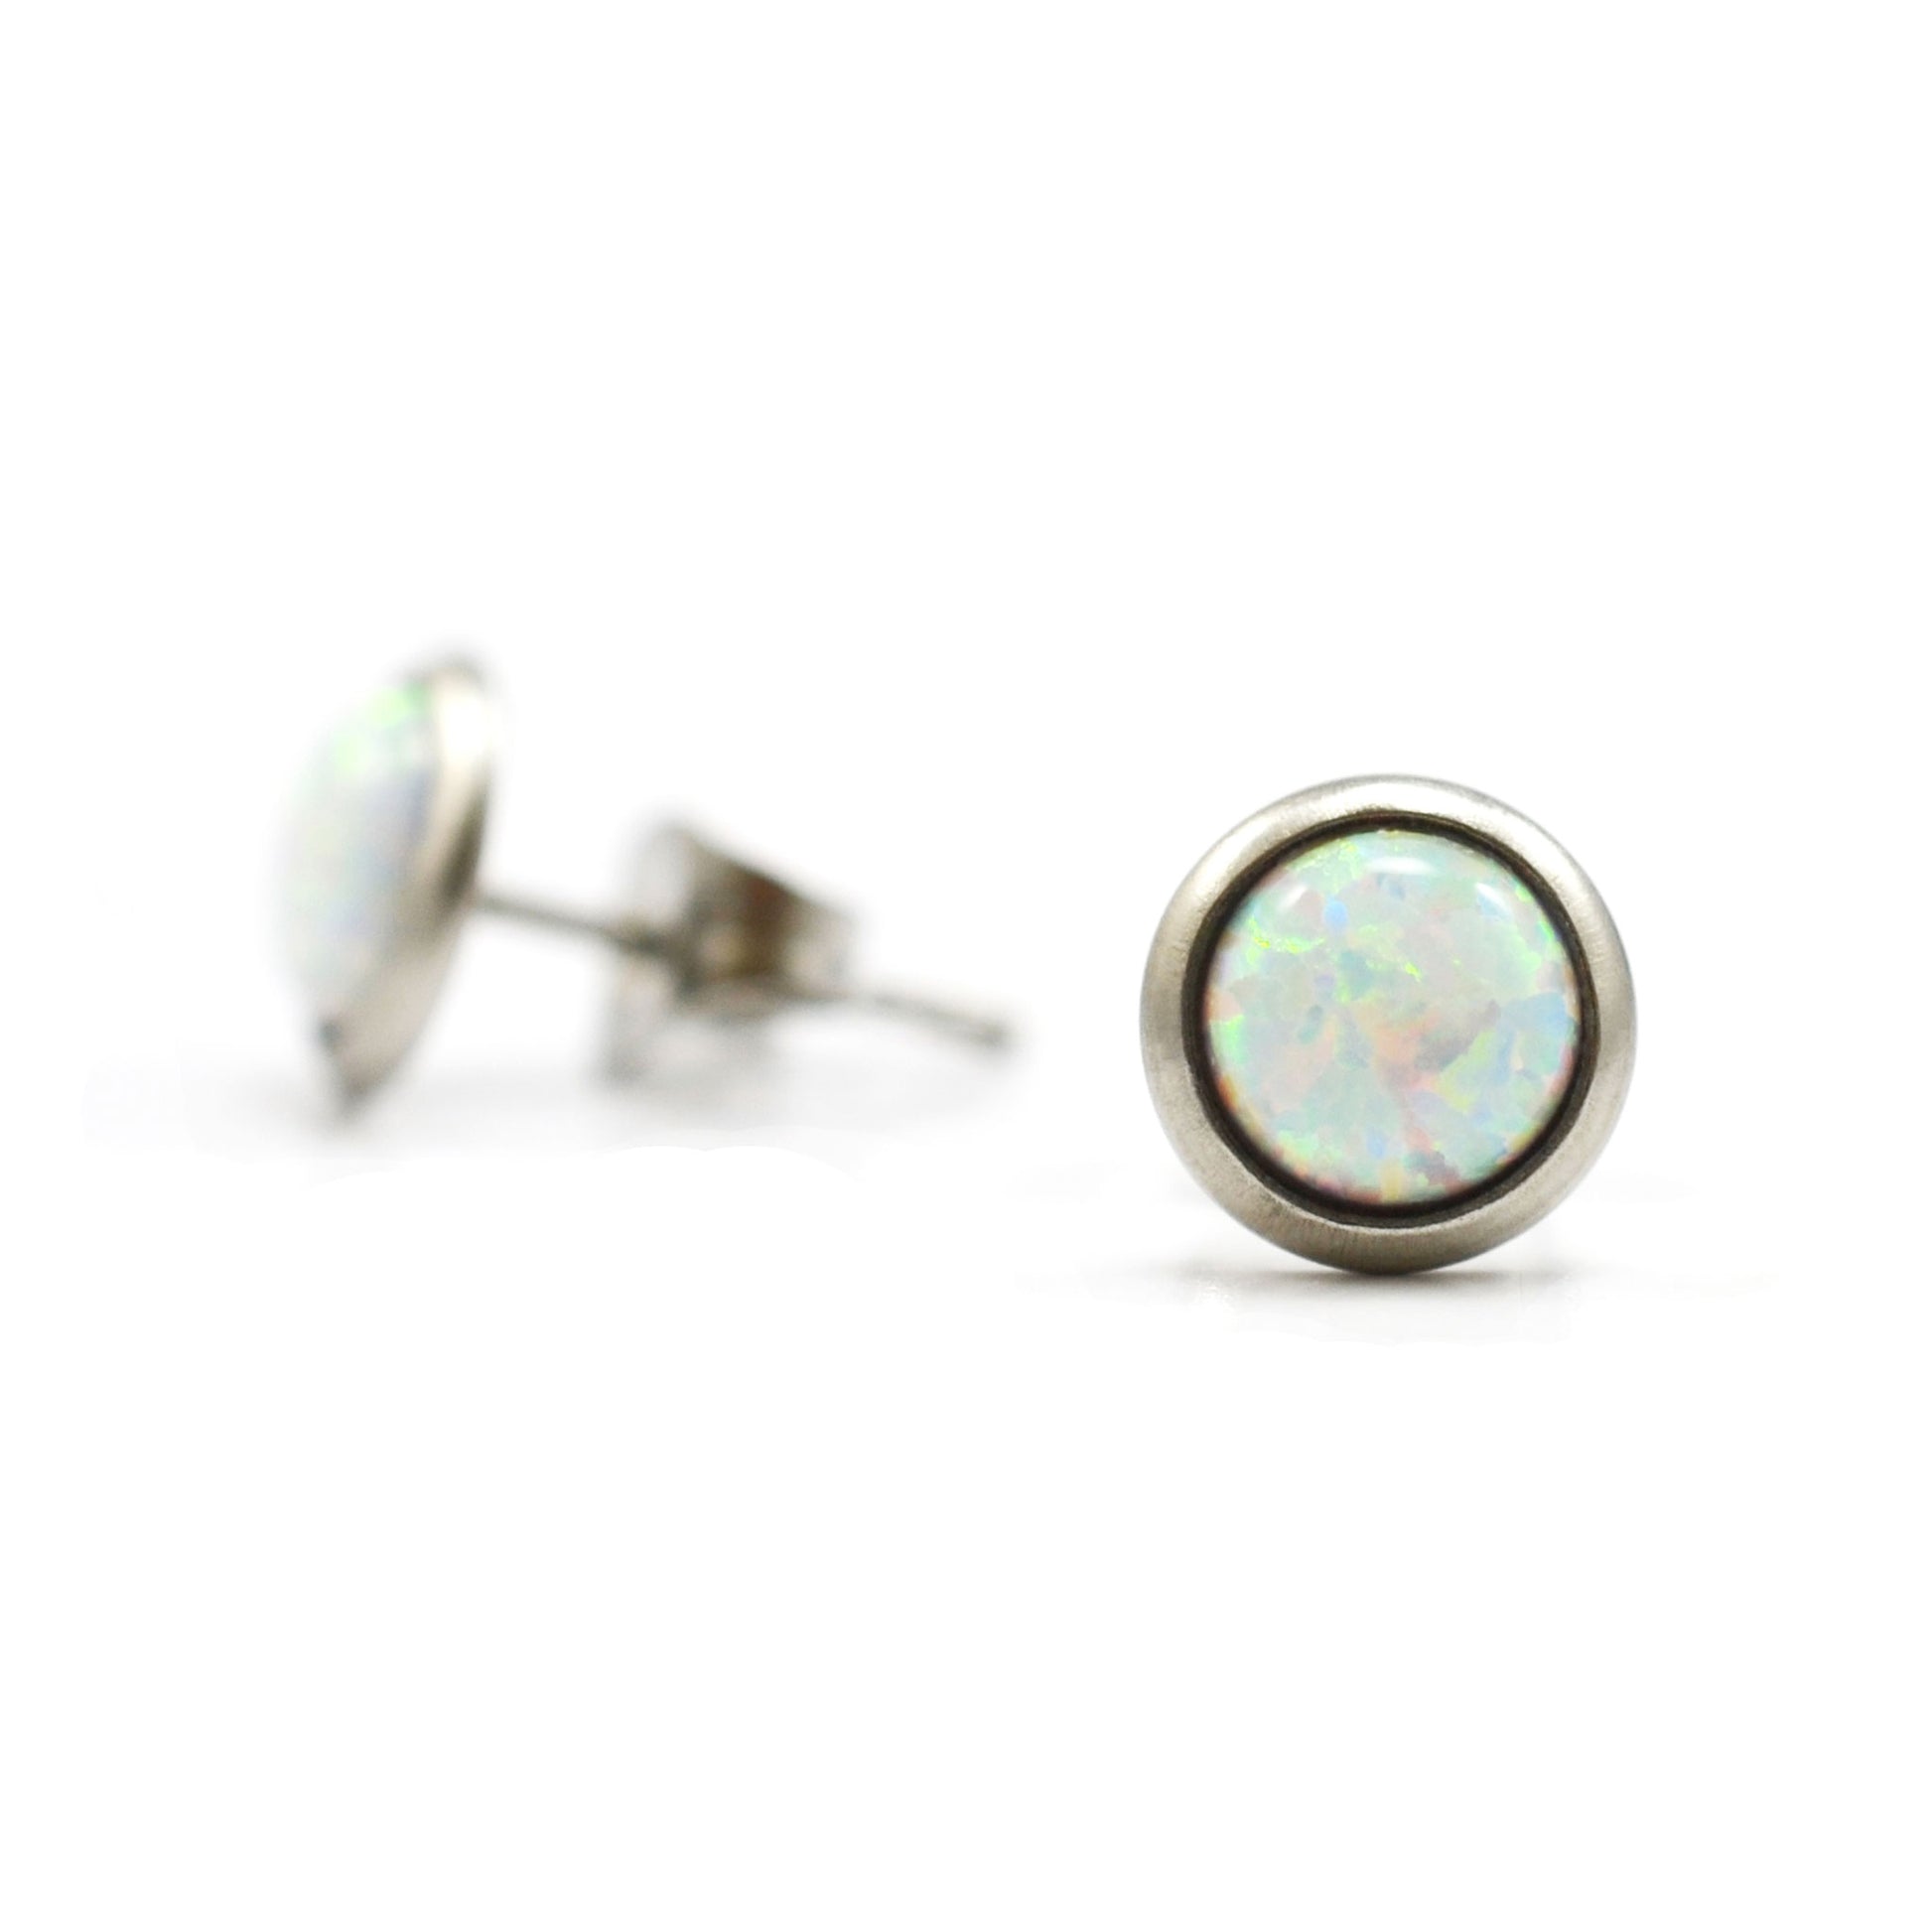 Round white Opal stud earrings on white background